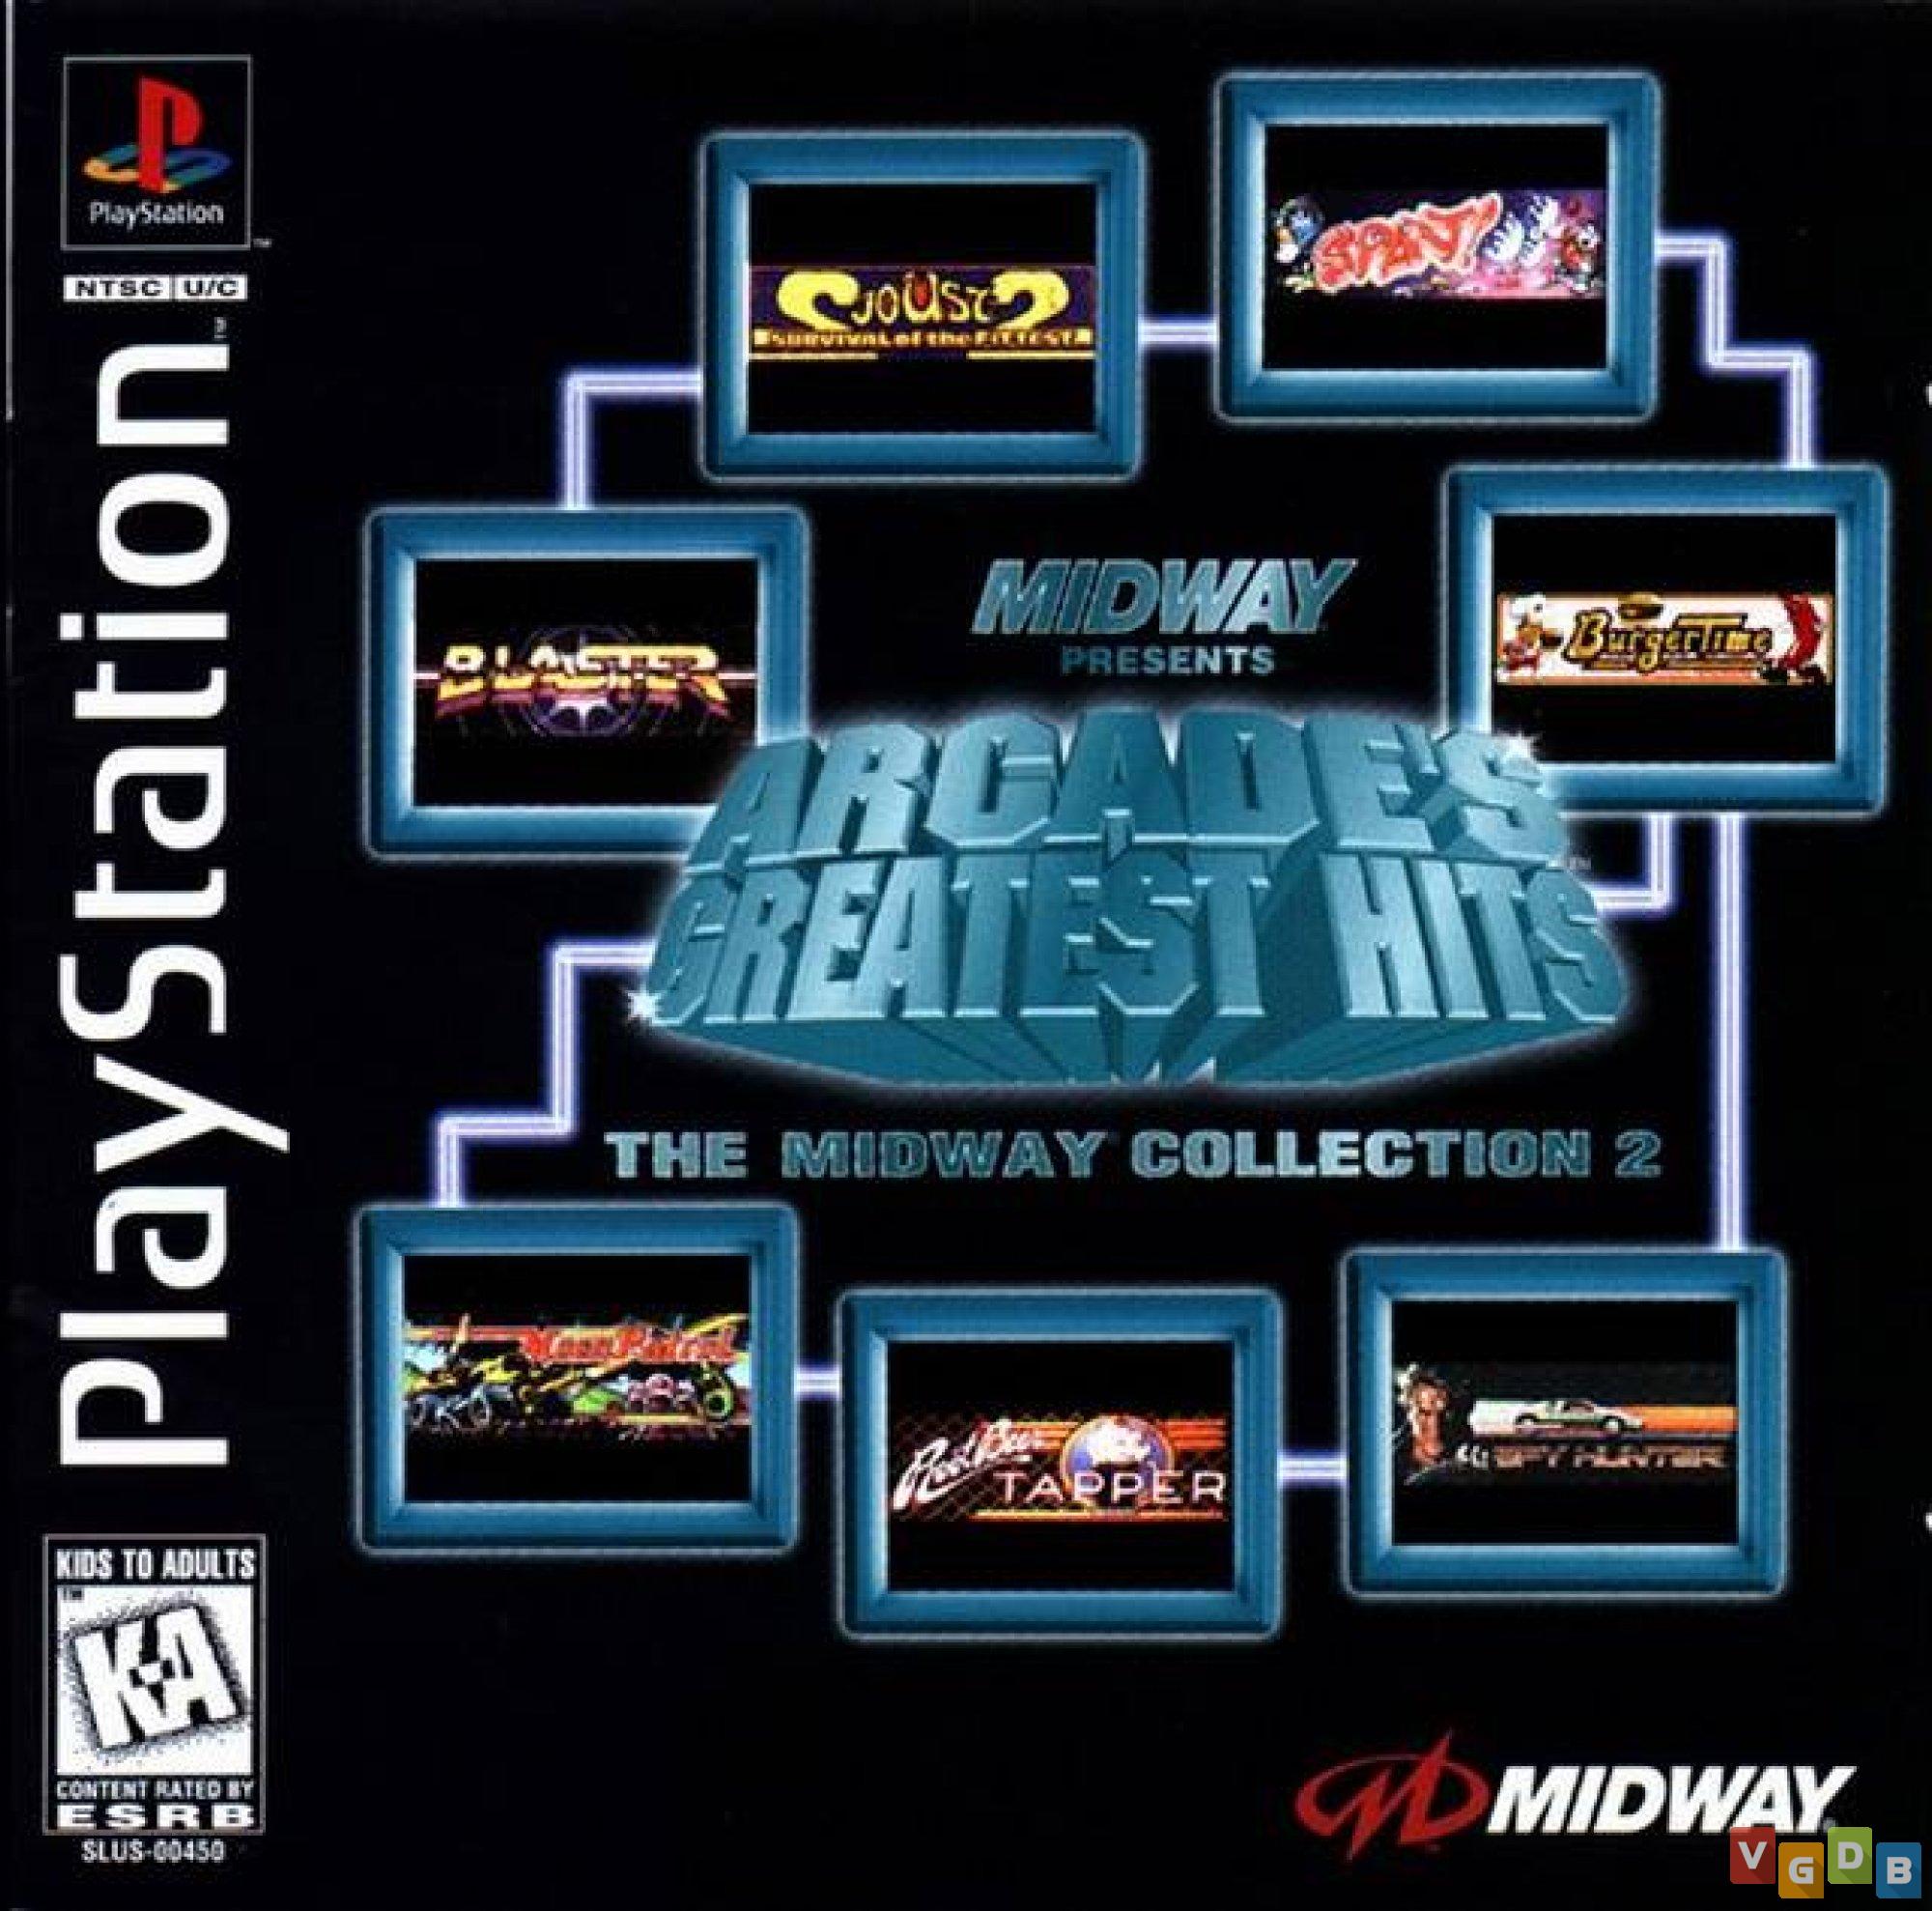 Best collection 2. Arcade's Greatest Hits - the Midway collection 2. 2 Midway Arcade. PLAYSTATION Greatest Hits игры. Midway студия игр.